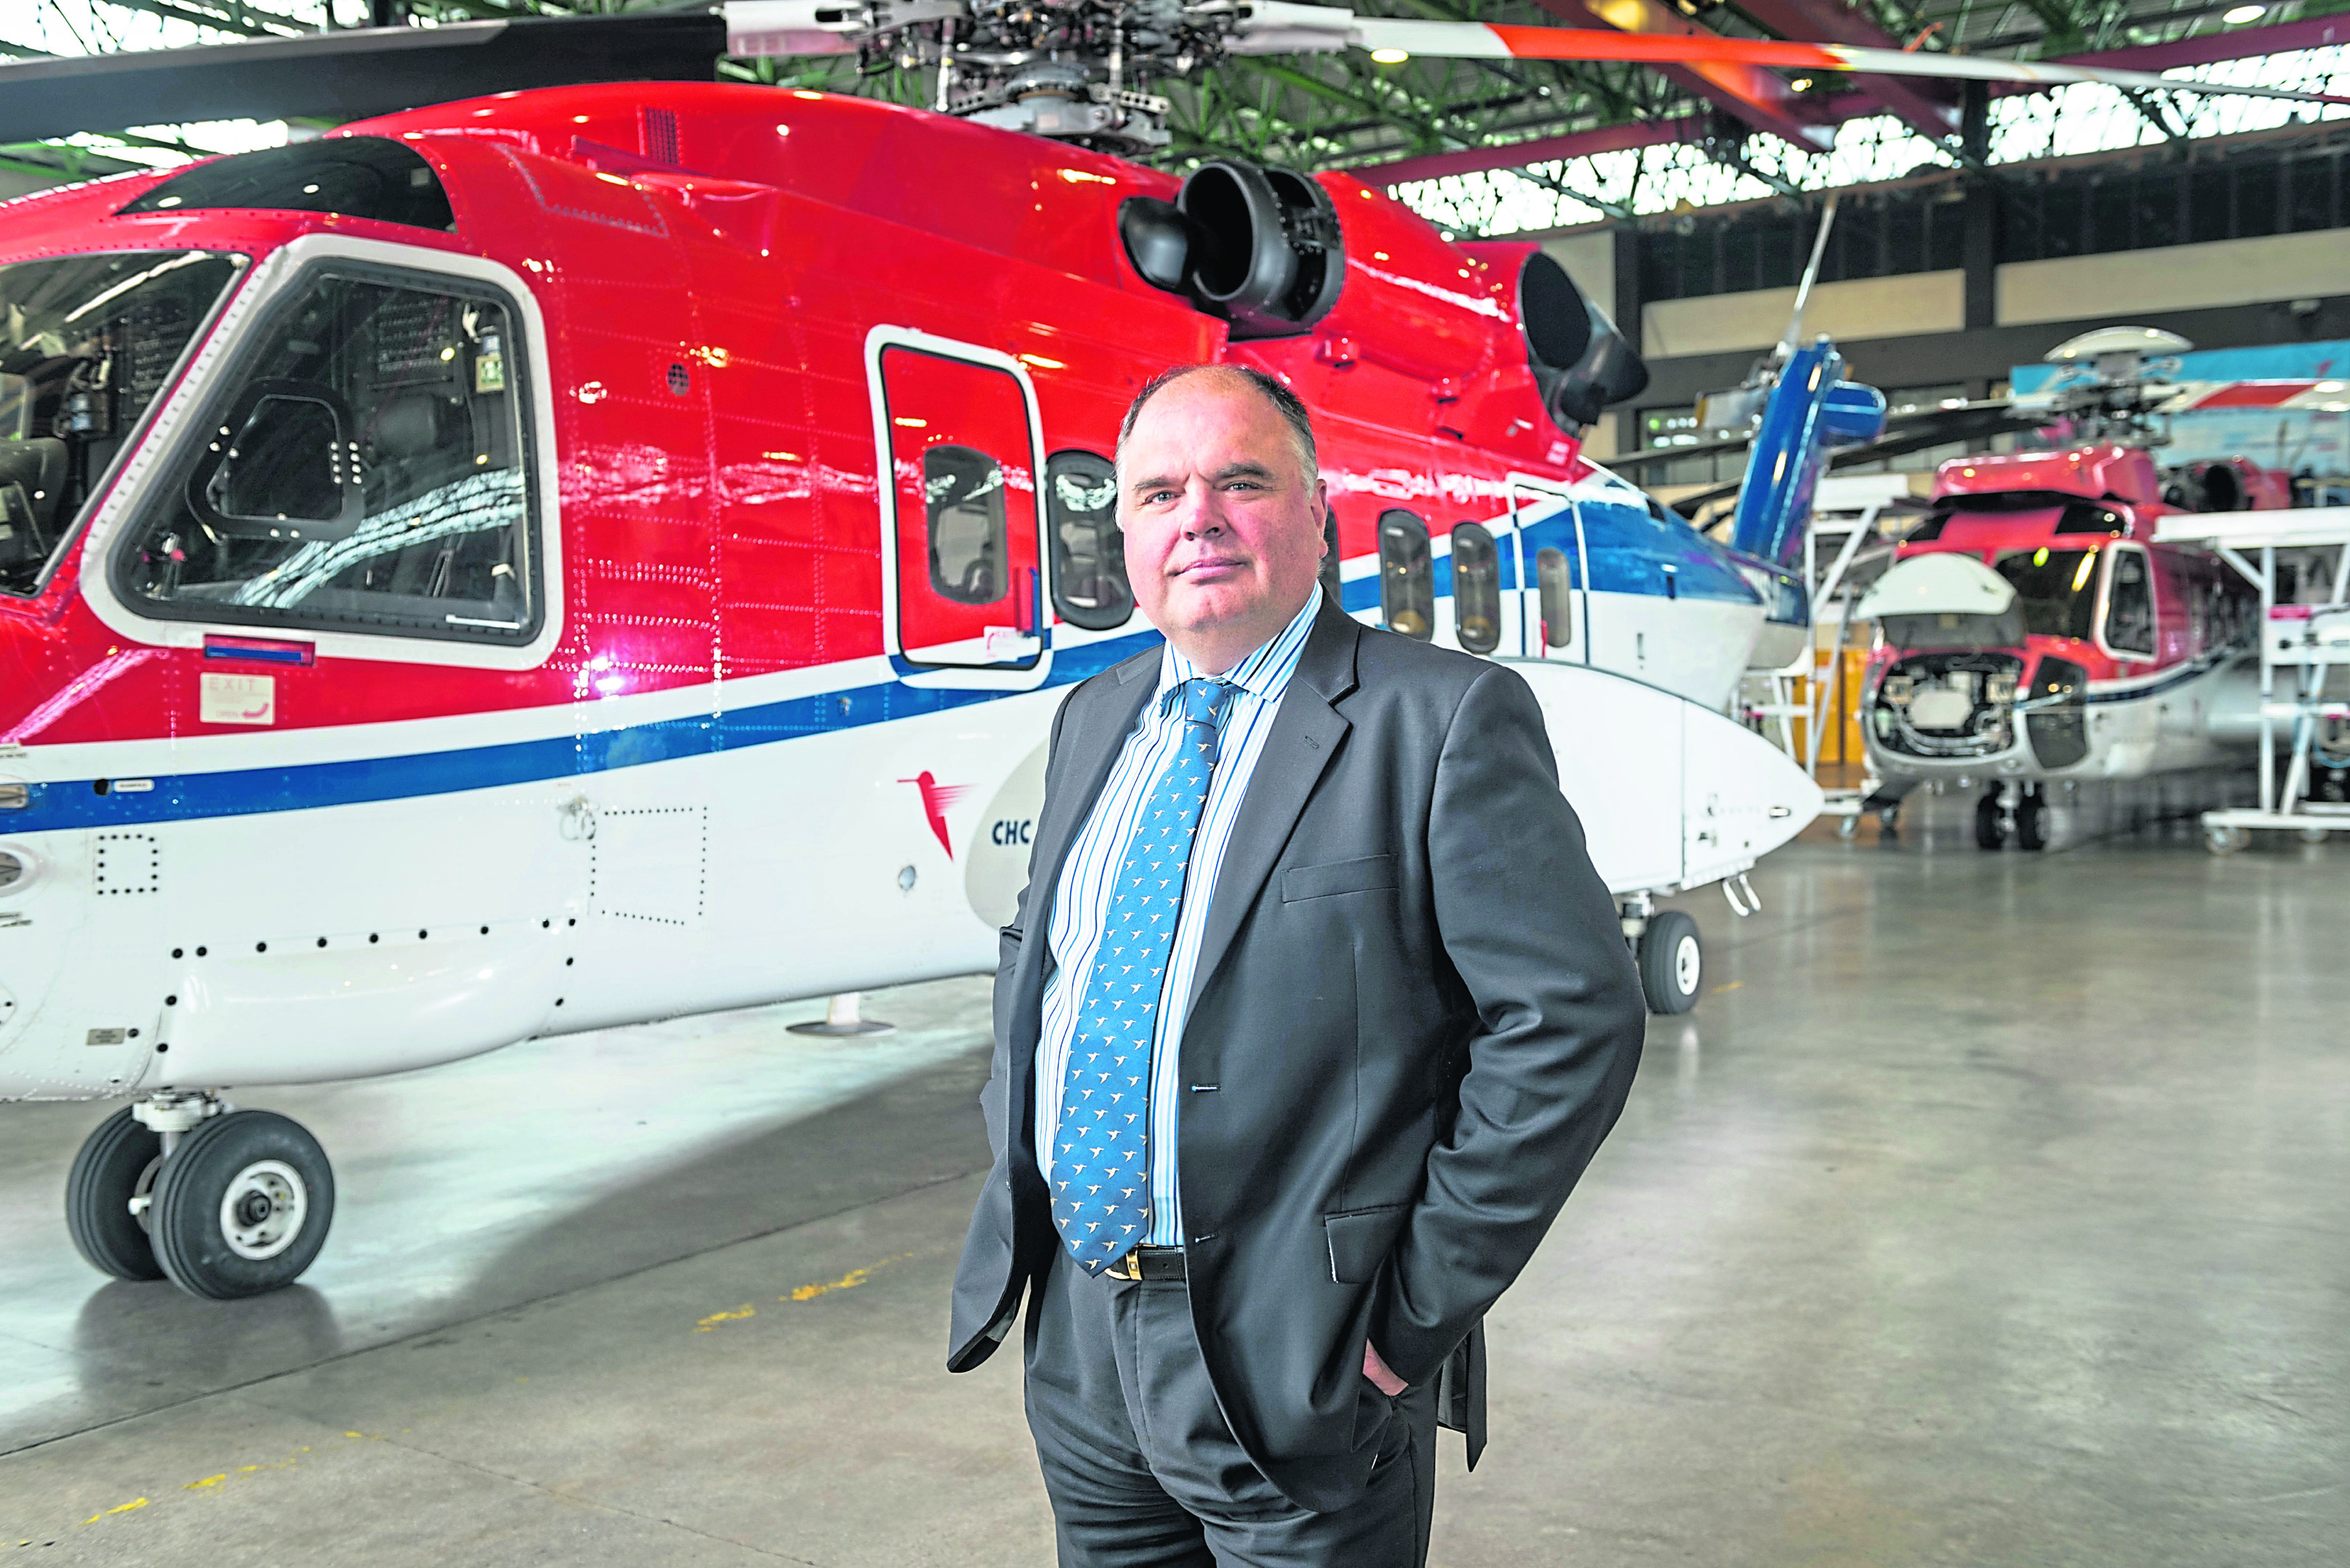 Mark Abbey, regional director, CHC Helicopter with a Sikorsky S92